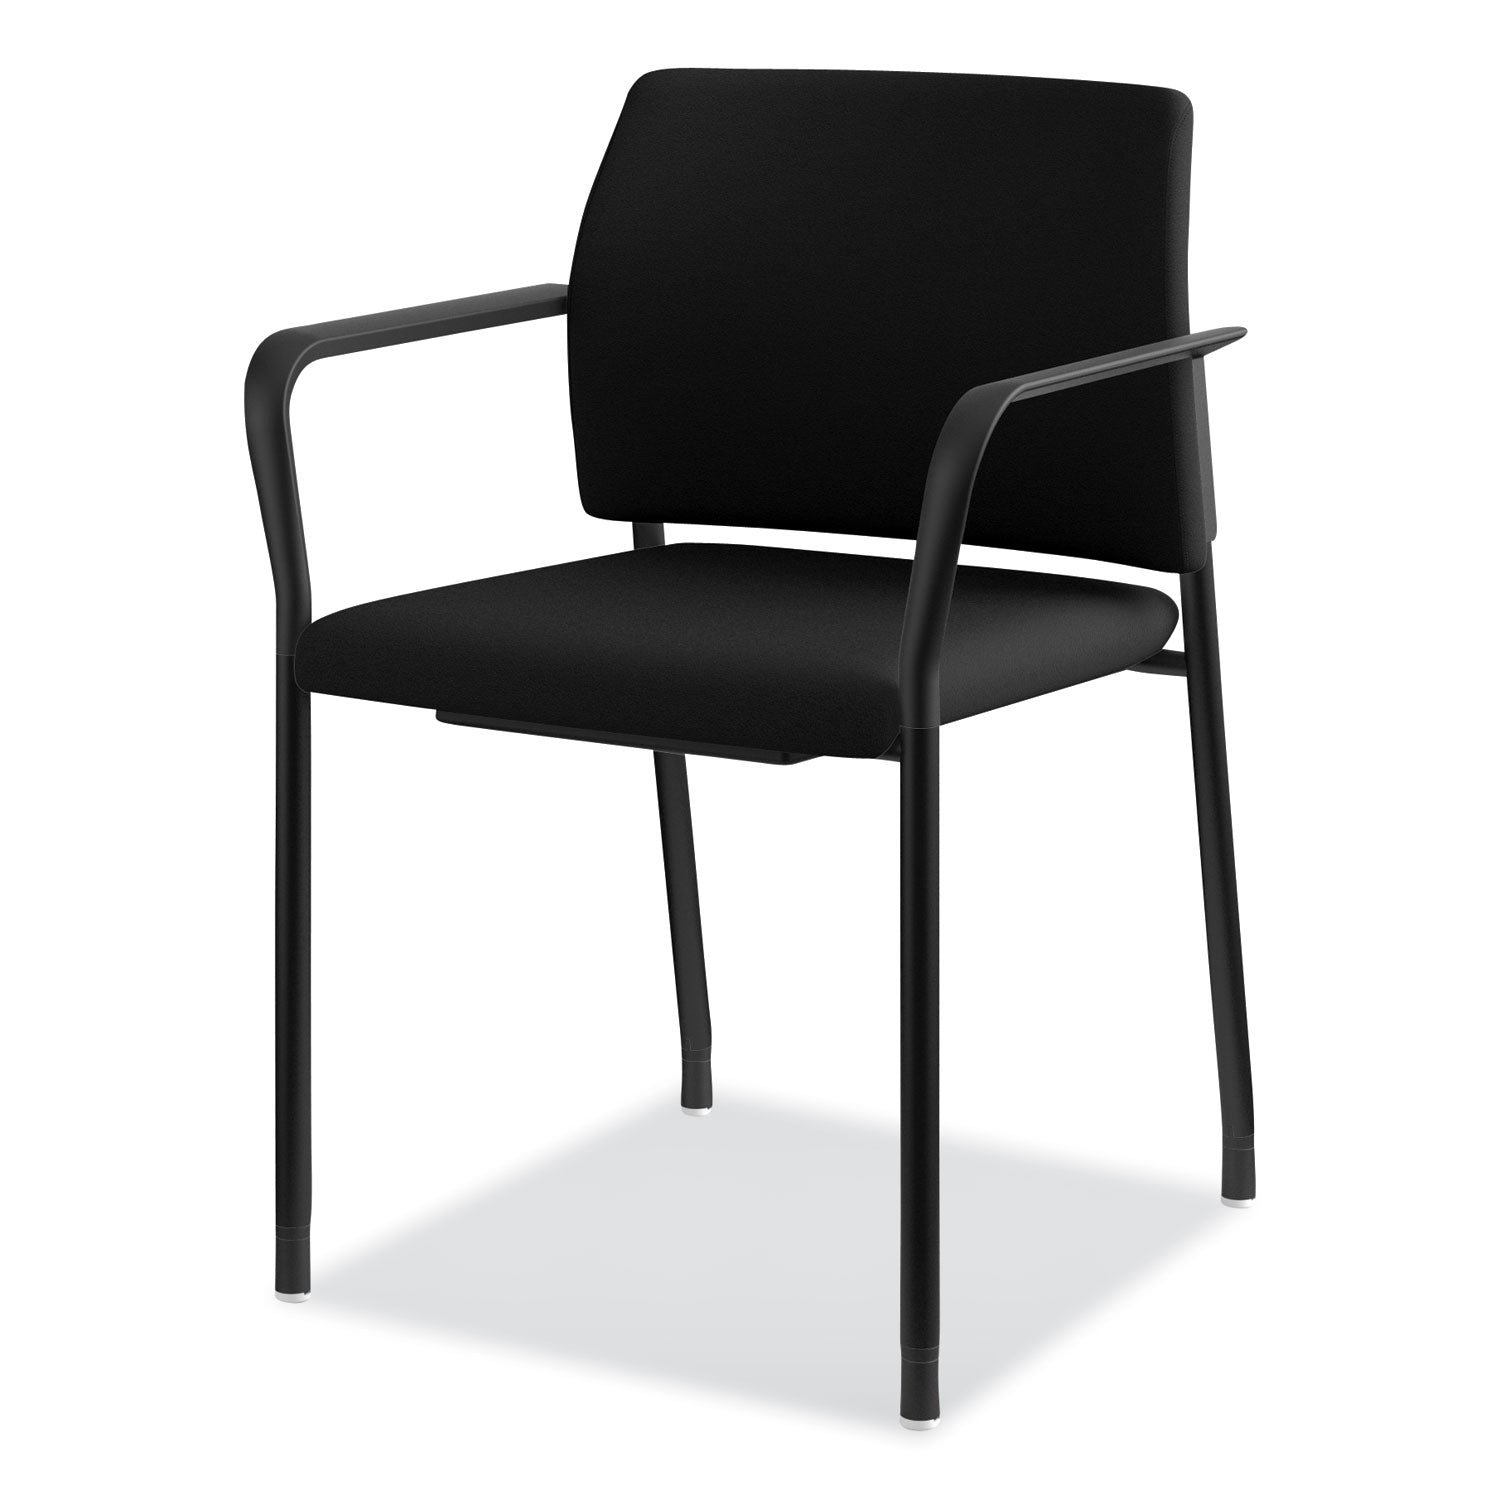 accommodate-series-guest-chair-with-arms-fabric-upholstery-2325-x-2225-x-32-black-seat-back-charblack-legs-2-carton_honsgs6fbc10c - 3